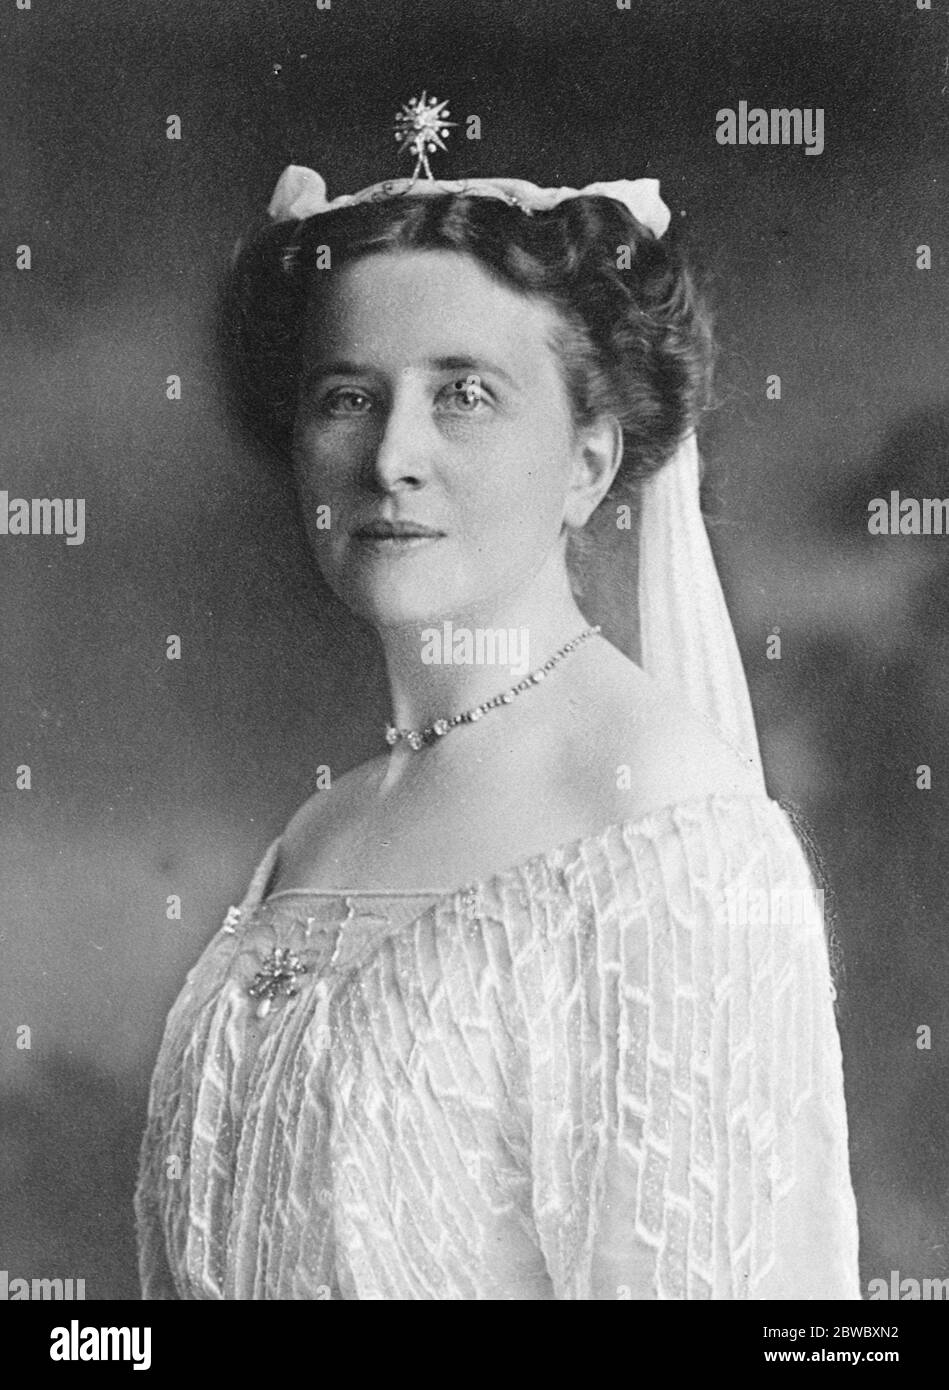 Ludendorff ' s new bride . Famous German general to marry woman doctor . It is announced that General Ludendorff is to marry a woman doctor , Mathilde von Kemnitz . 4 September 1926 Stock Photo